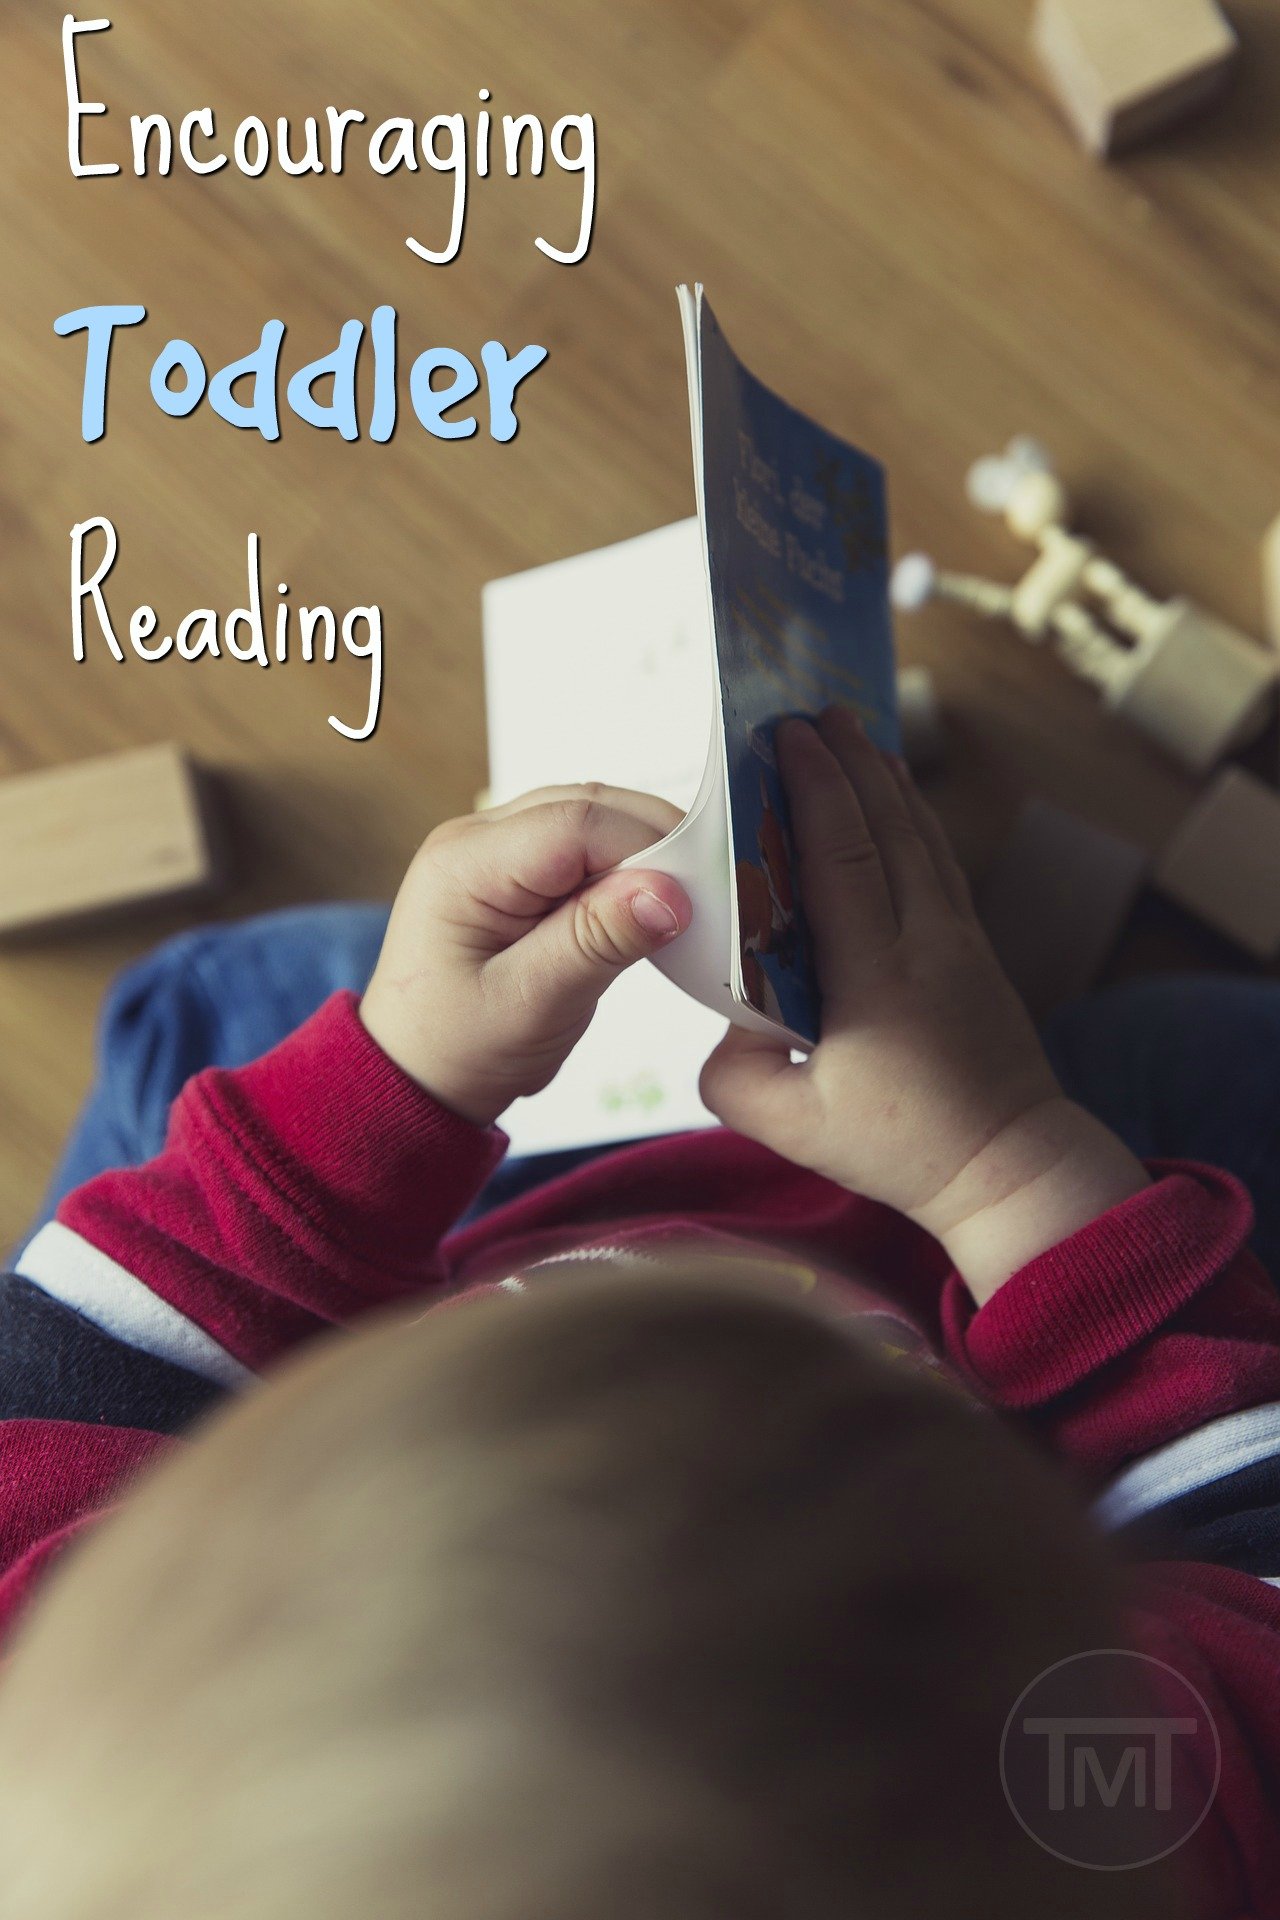 Toddler reading can be a painful experience as they are learning but it is the foundation of learning so here are some ways to make it bearable and fun.